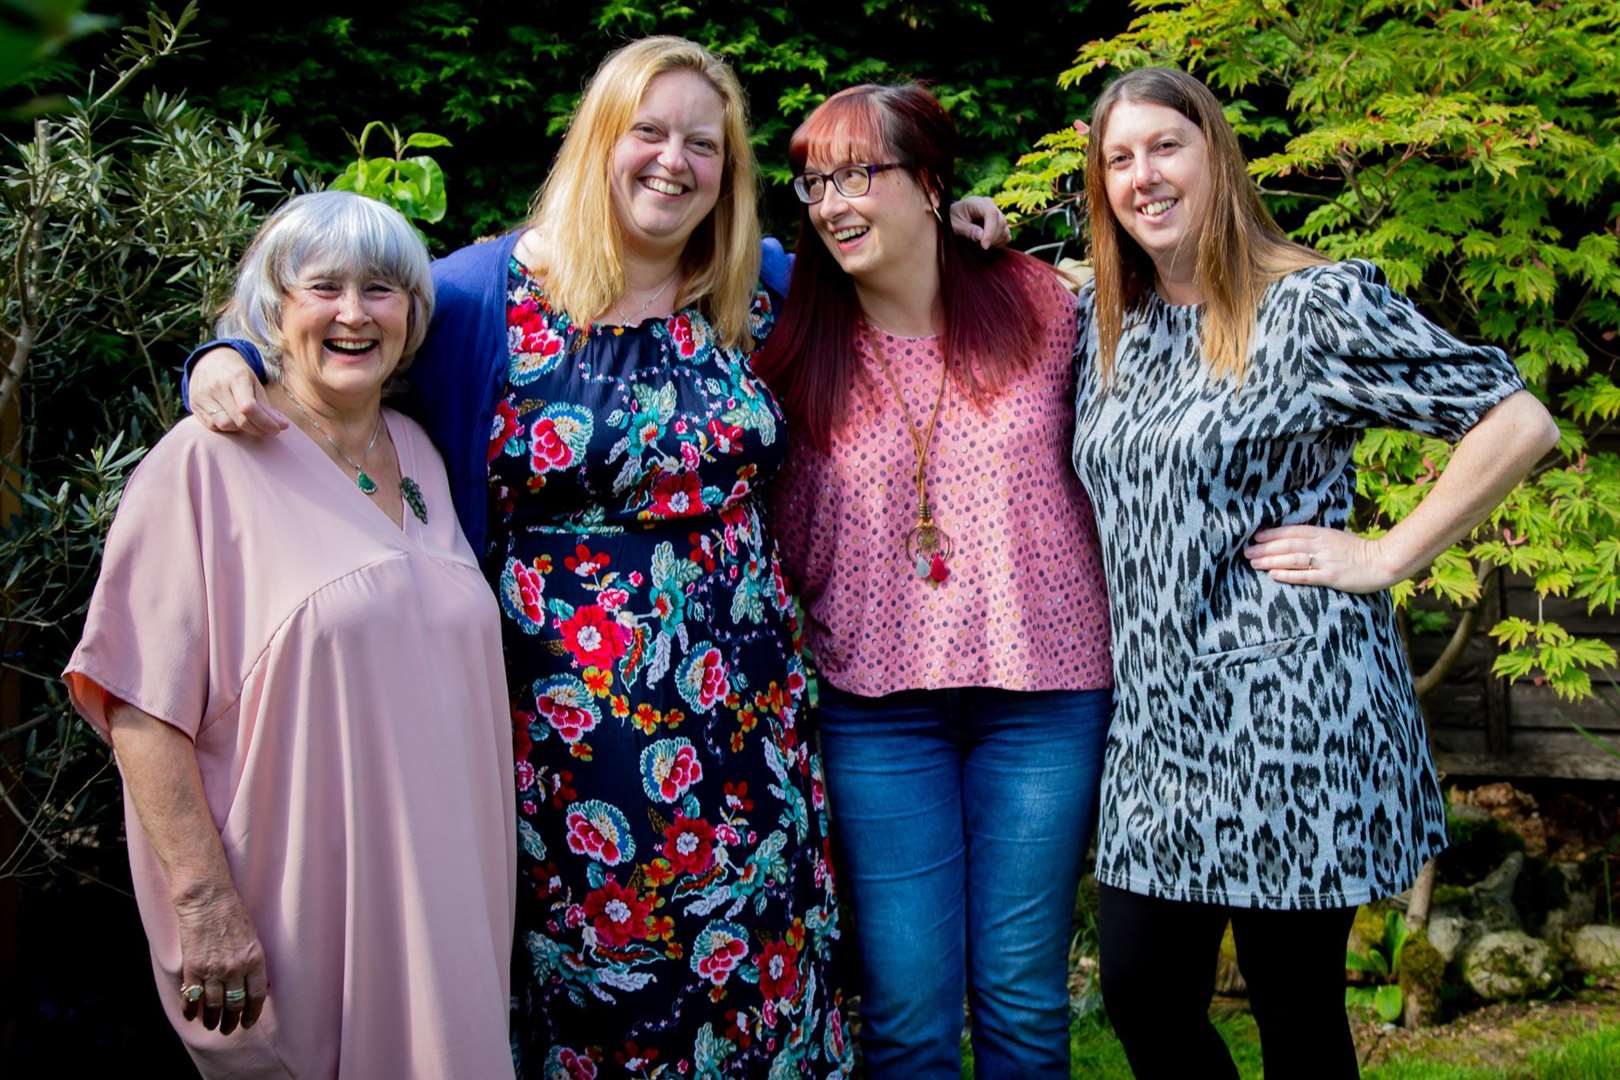 Pictured from left to right: Liz Boniface, Kate Davies, Diane Furlong and Claire Perkins. Photo credit: Strawberry Photography